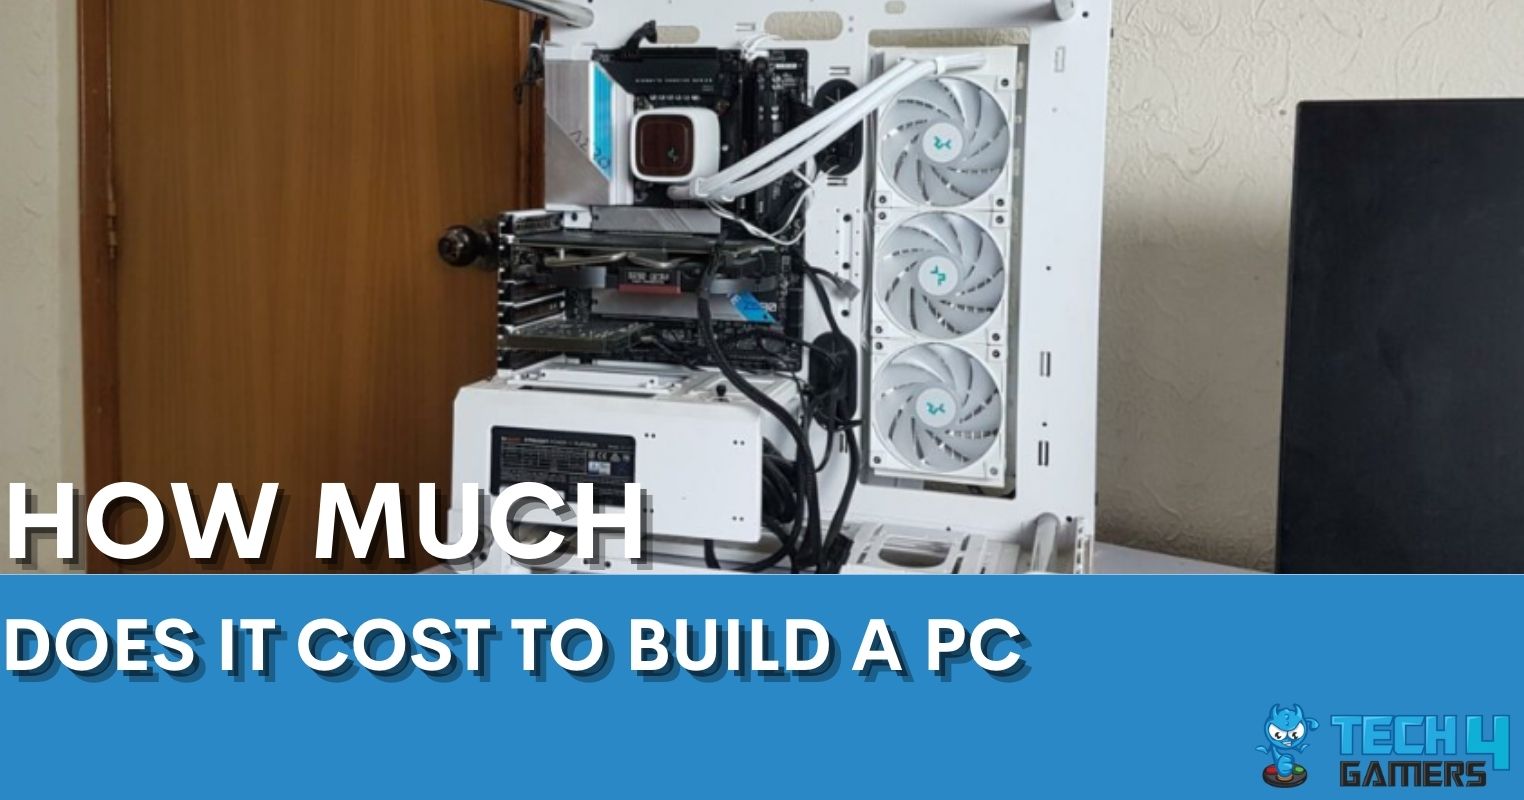 HOW MUCH DOES IT COST TO BUILD A PC 1 